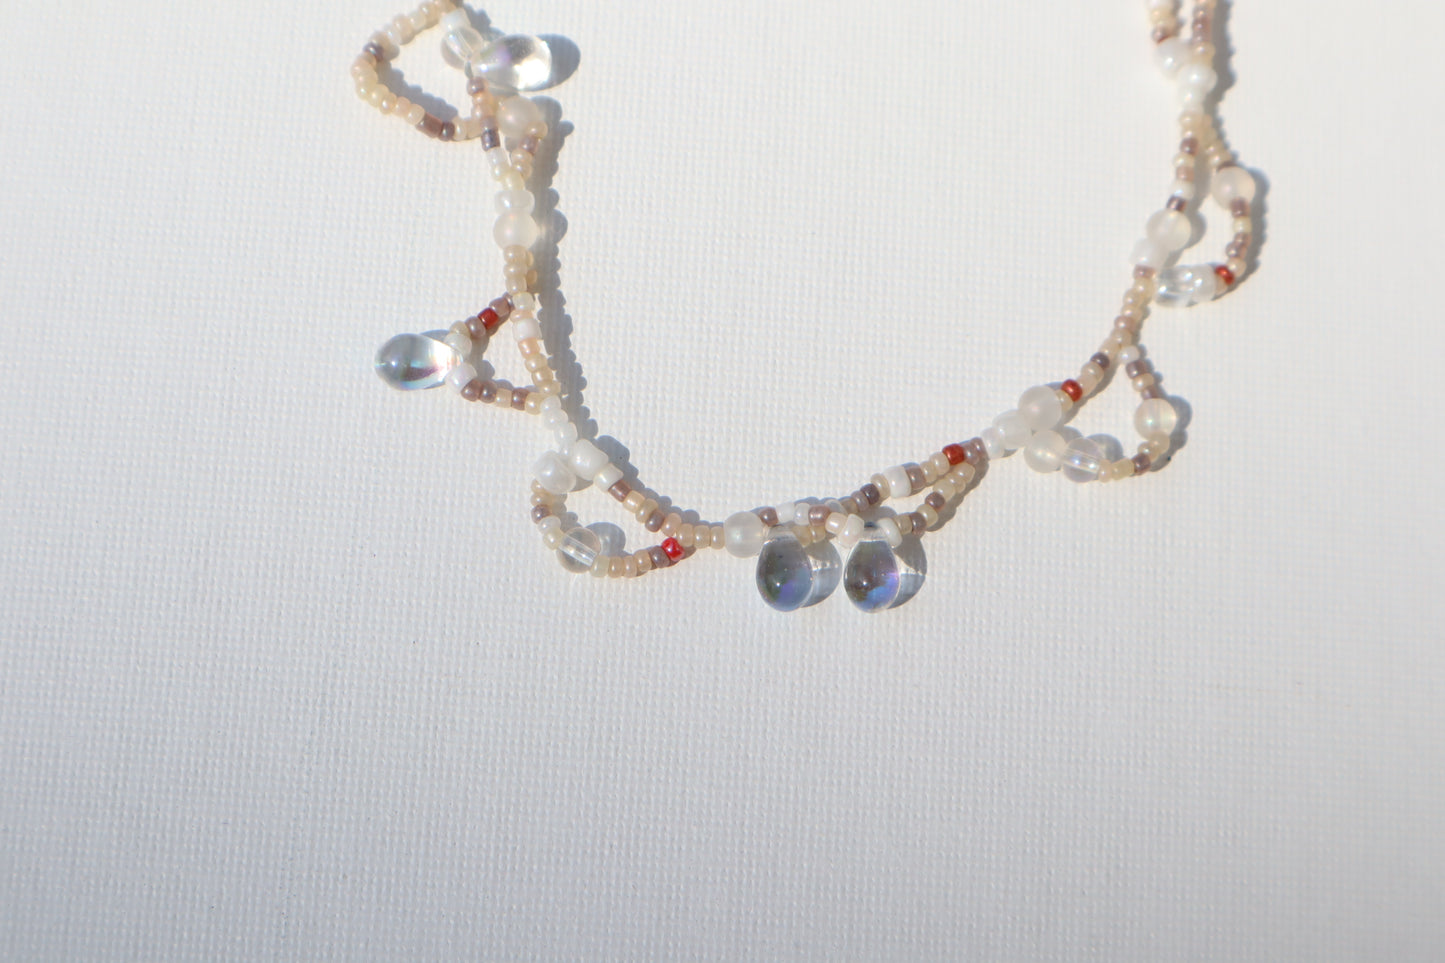 008 Sand Glass Beads Necklace